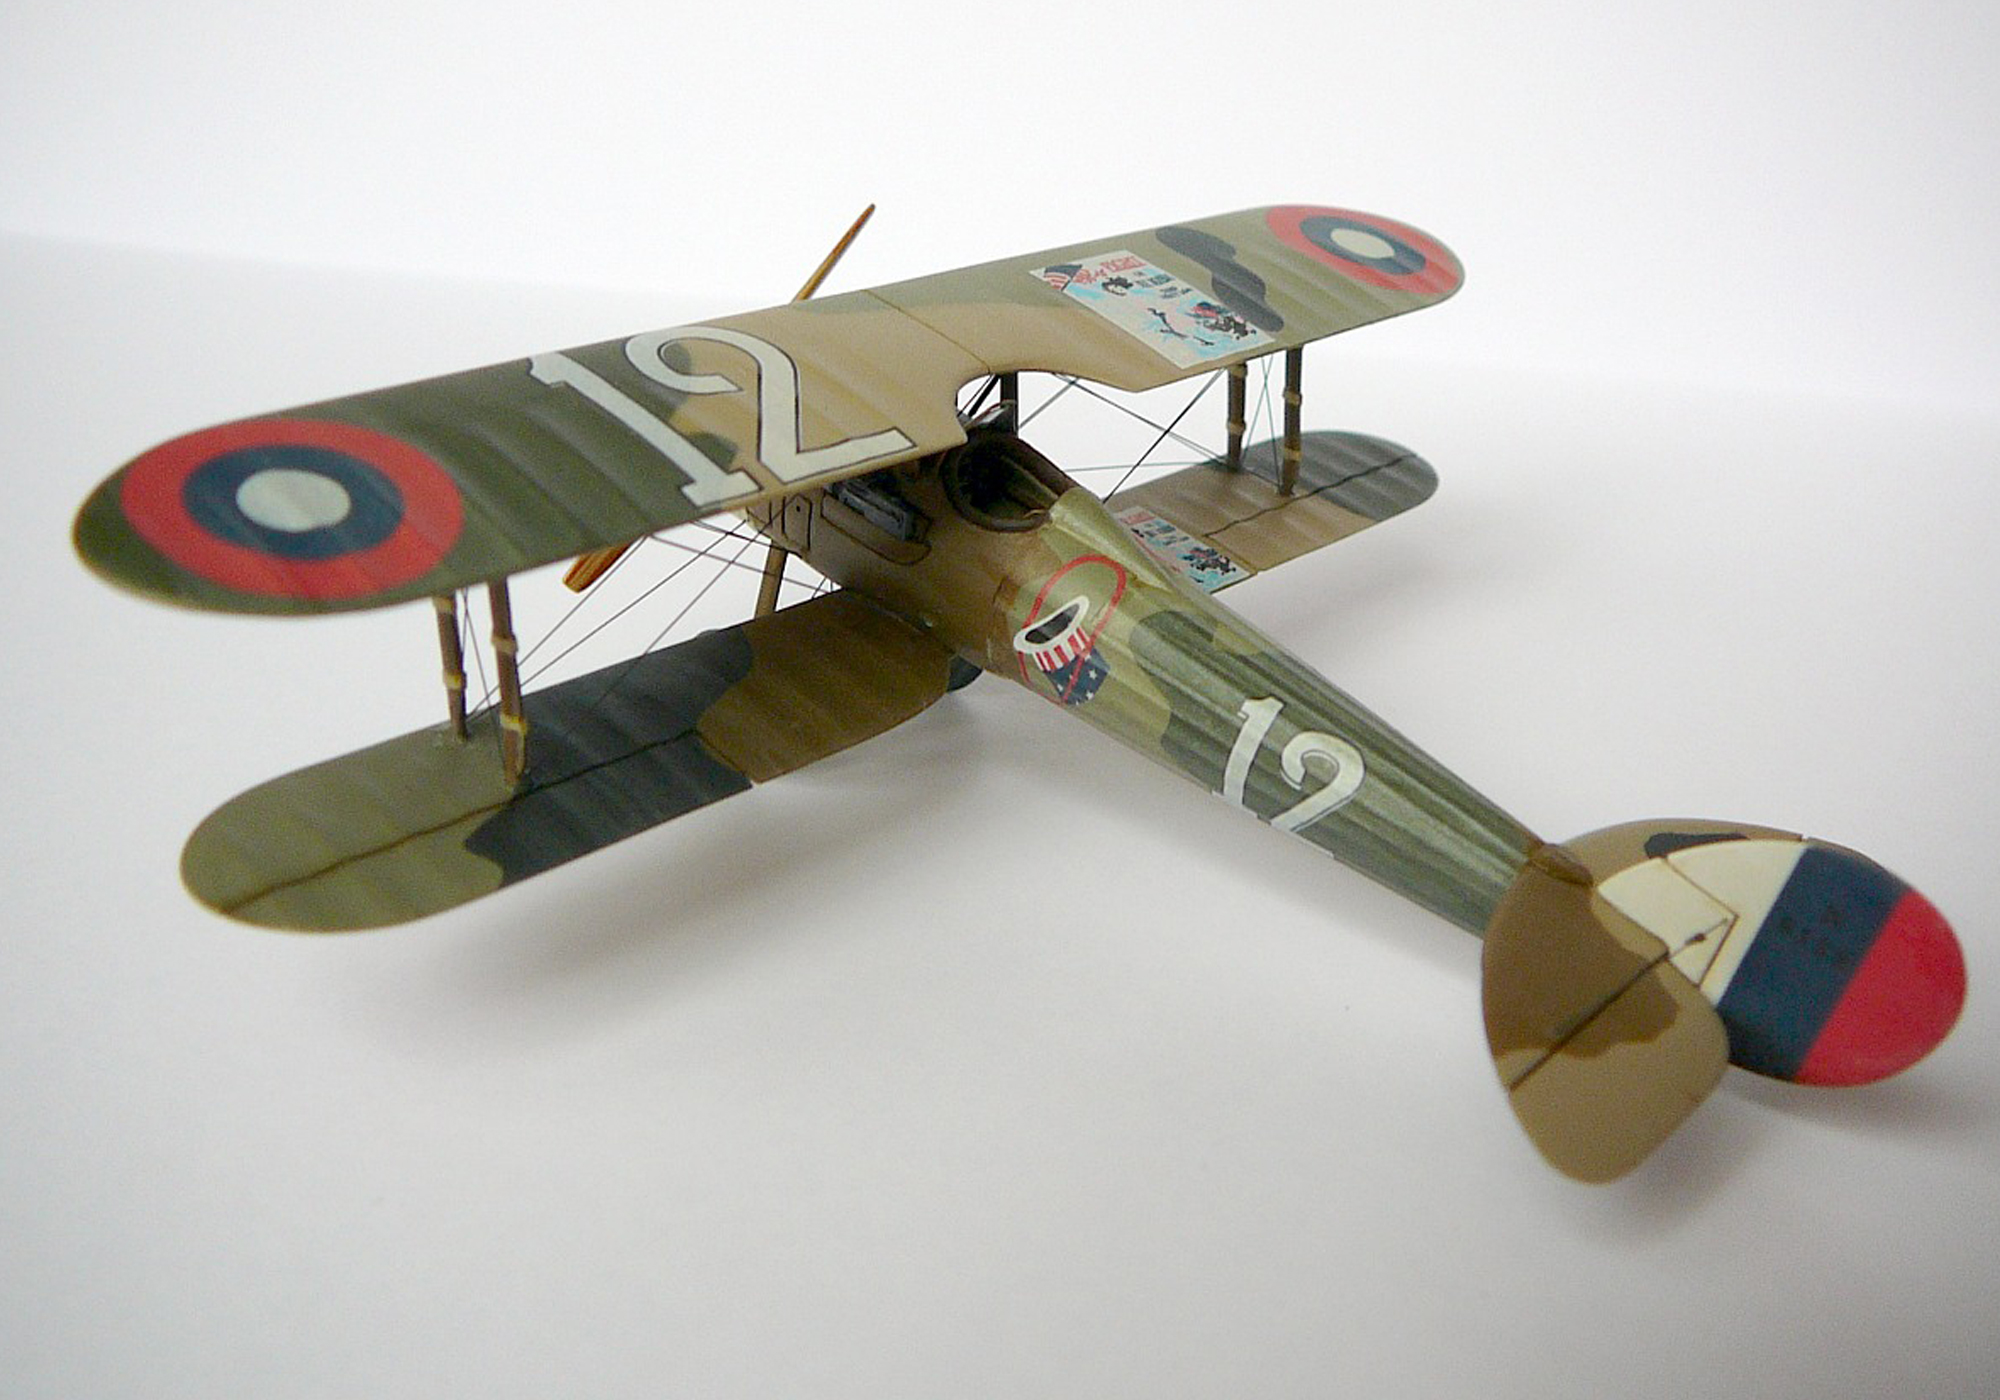 NIEUPORT N.28 C1 WWI FIGHTER - REVELL 1/72 scale (TWIN KIT)